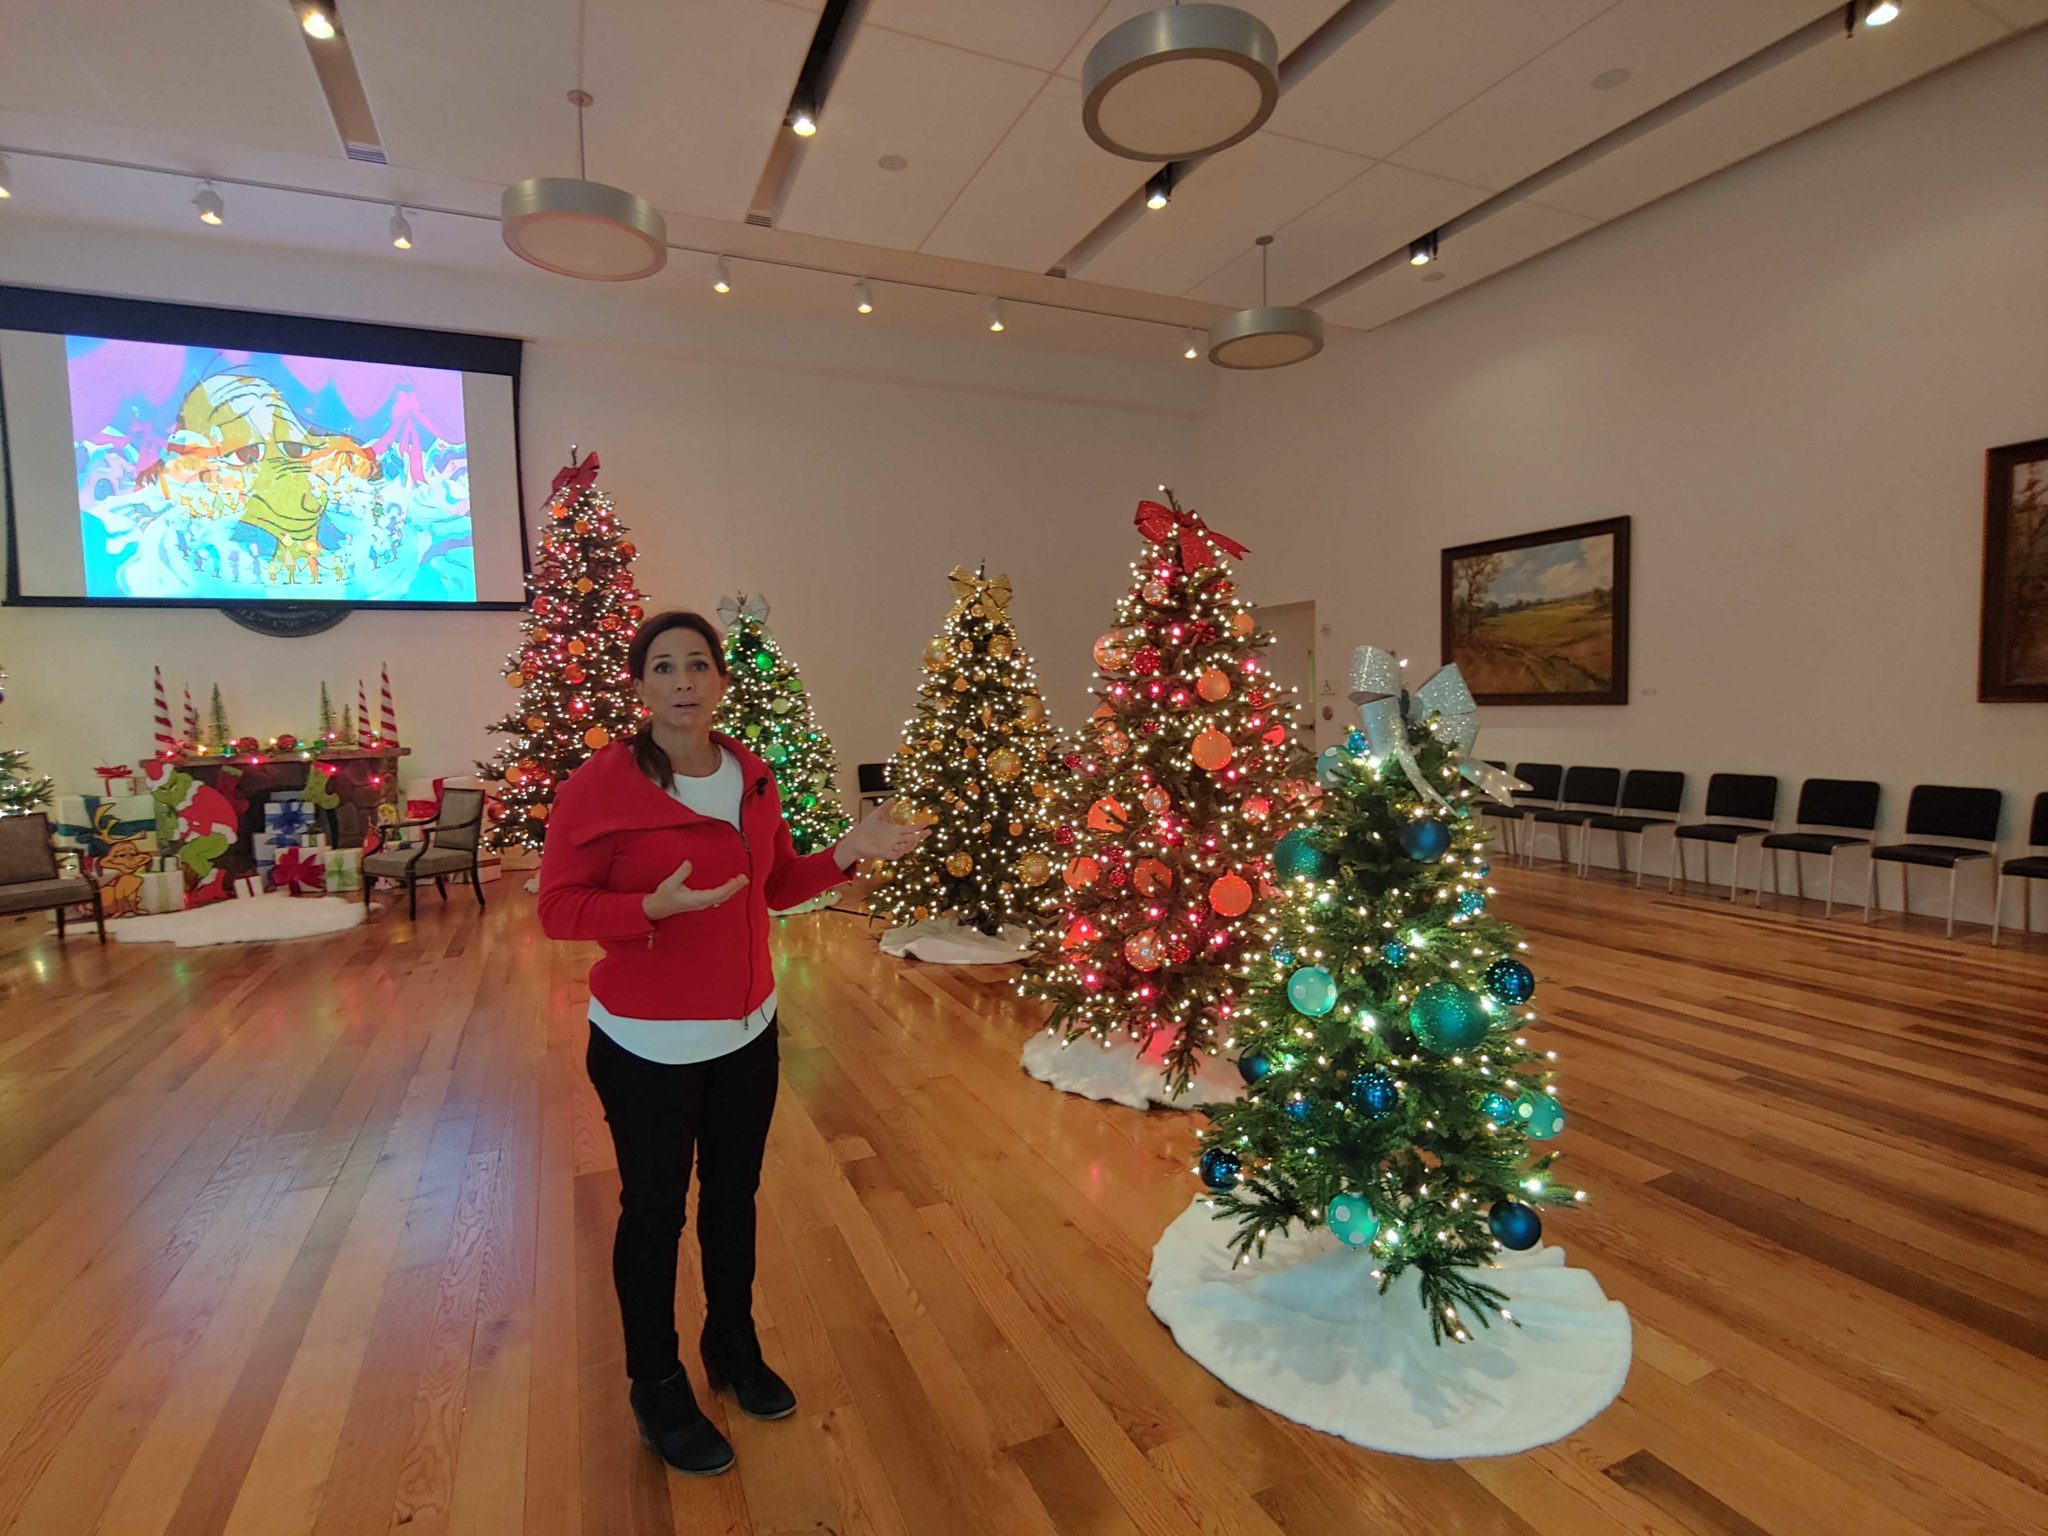 21 Trees And Hundreds of Christmas Lights A Holiday Tour Of The